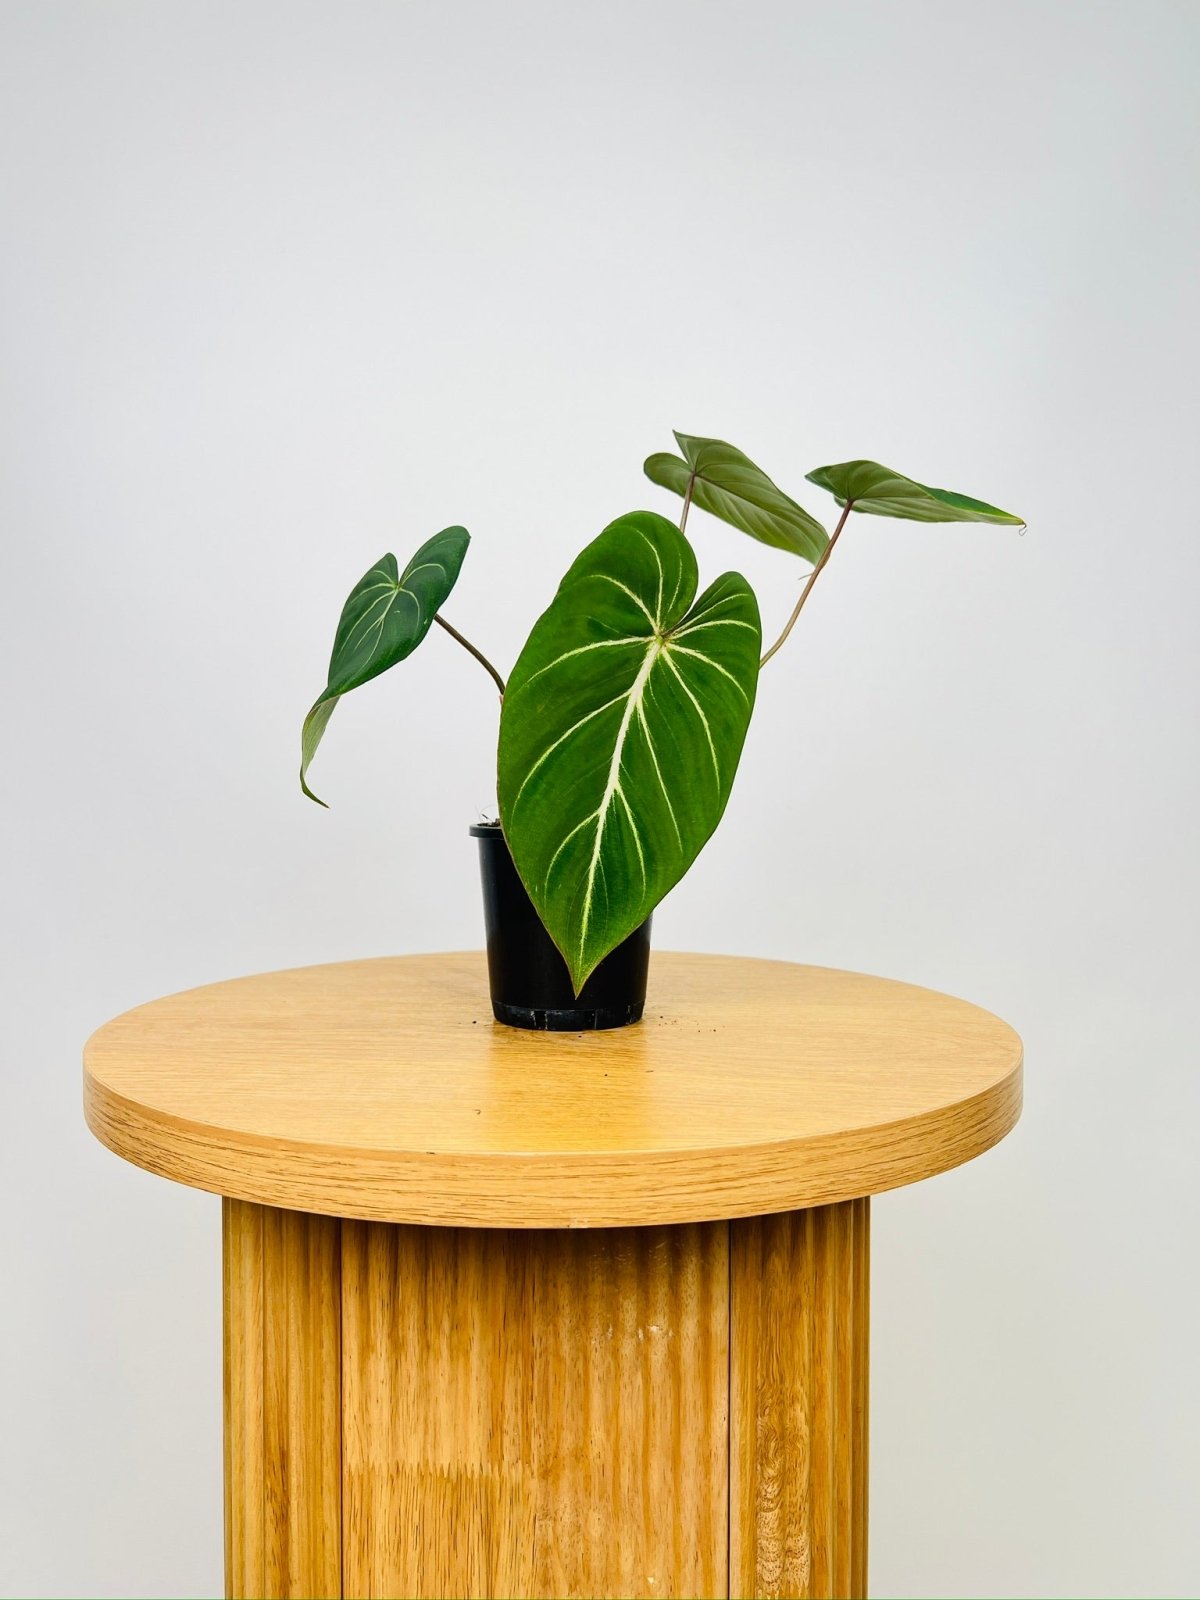 Philodendron Gloriosum "White Vein" | Uprooted